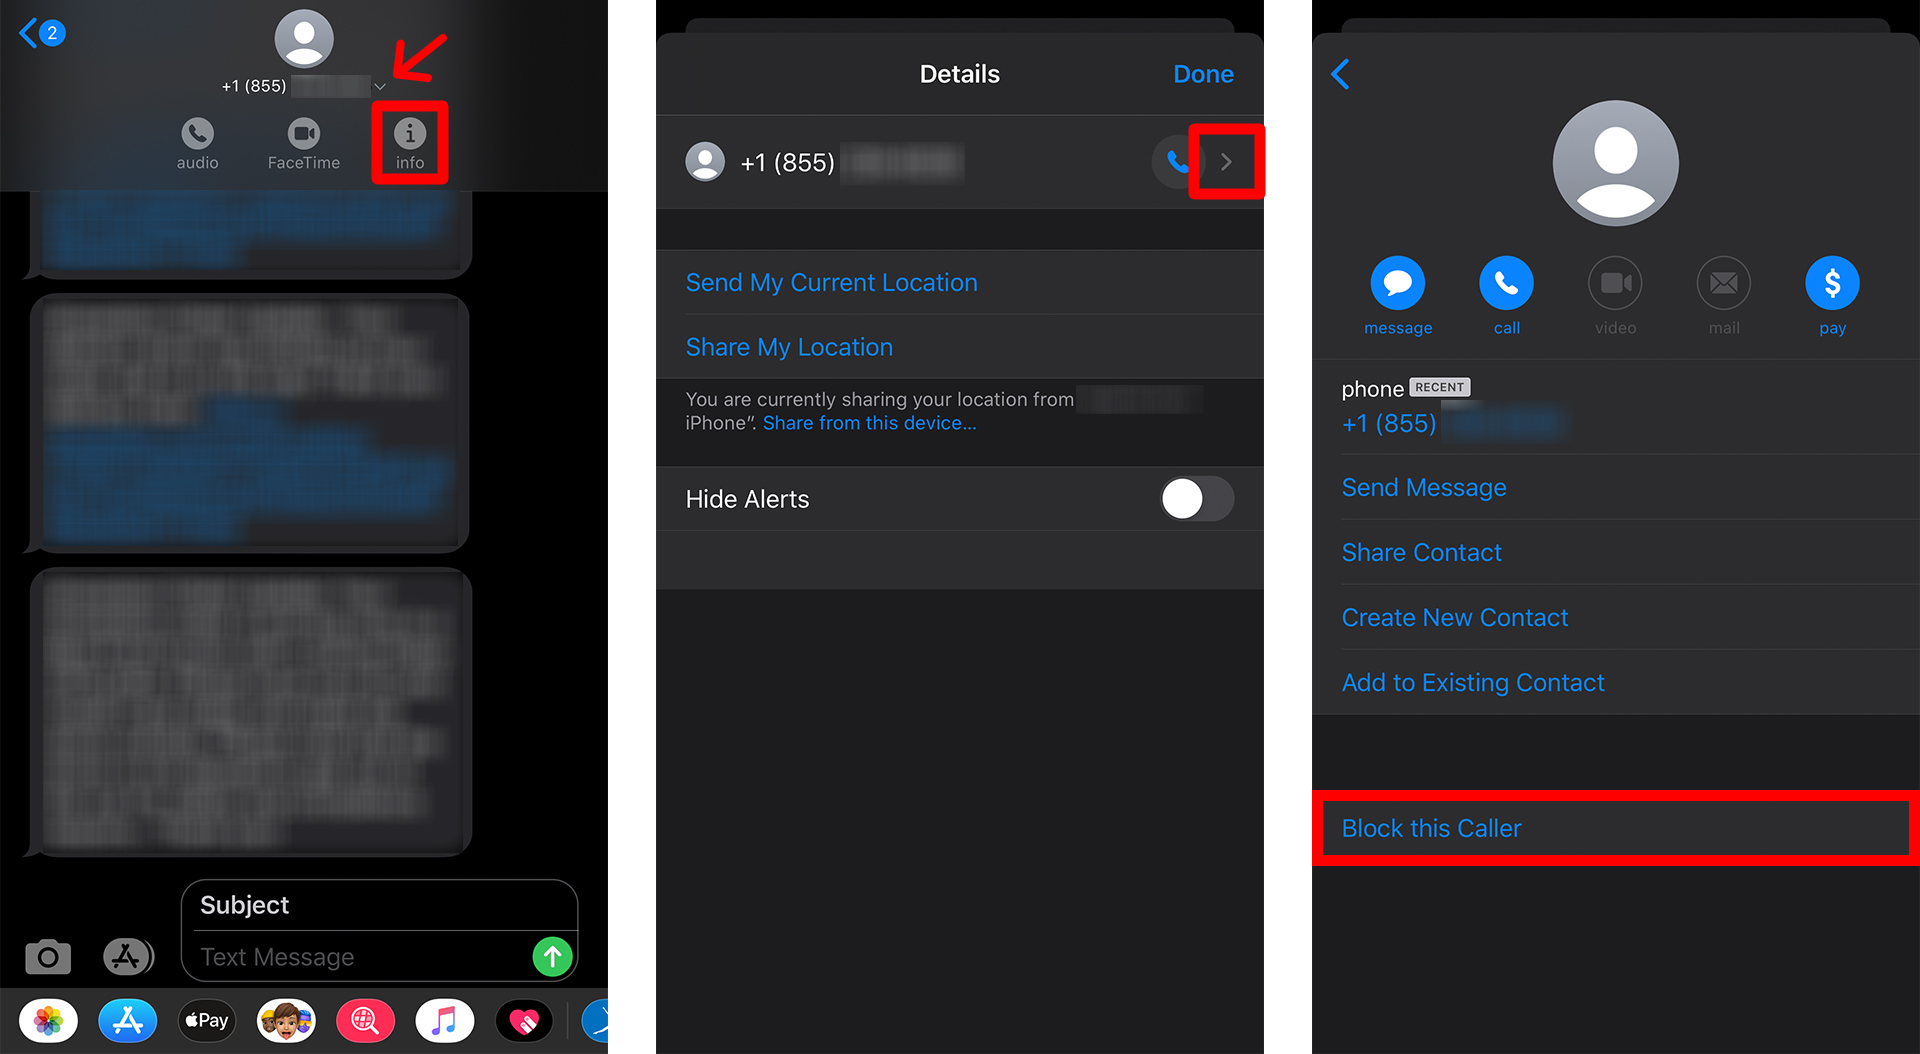 How to Block Text Messages from a Single Number on an iPhone